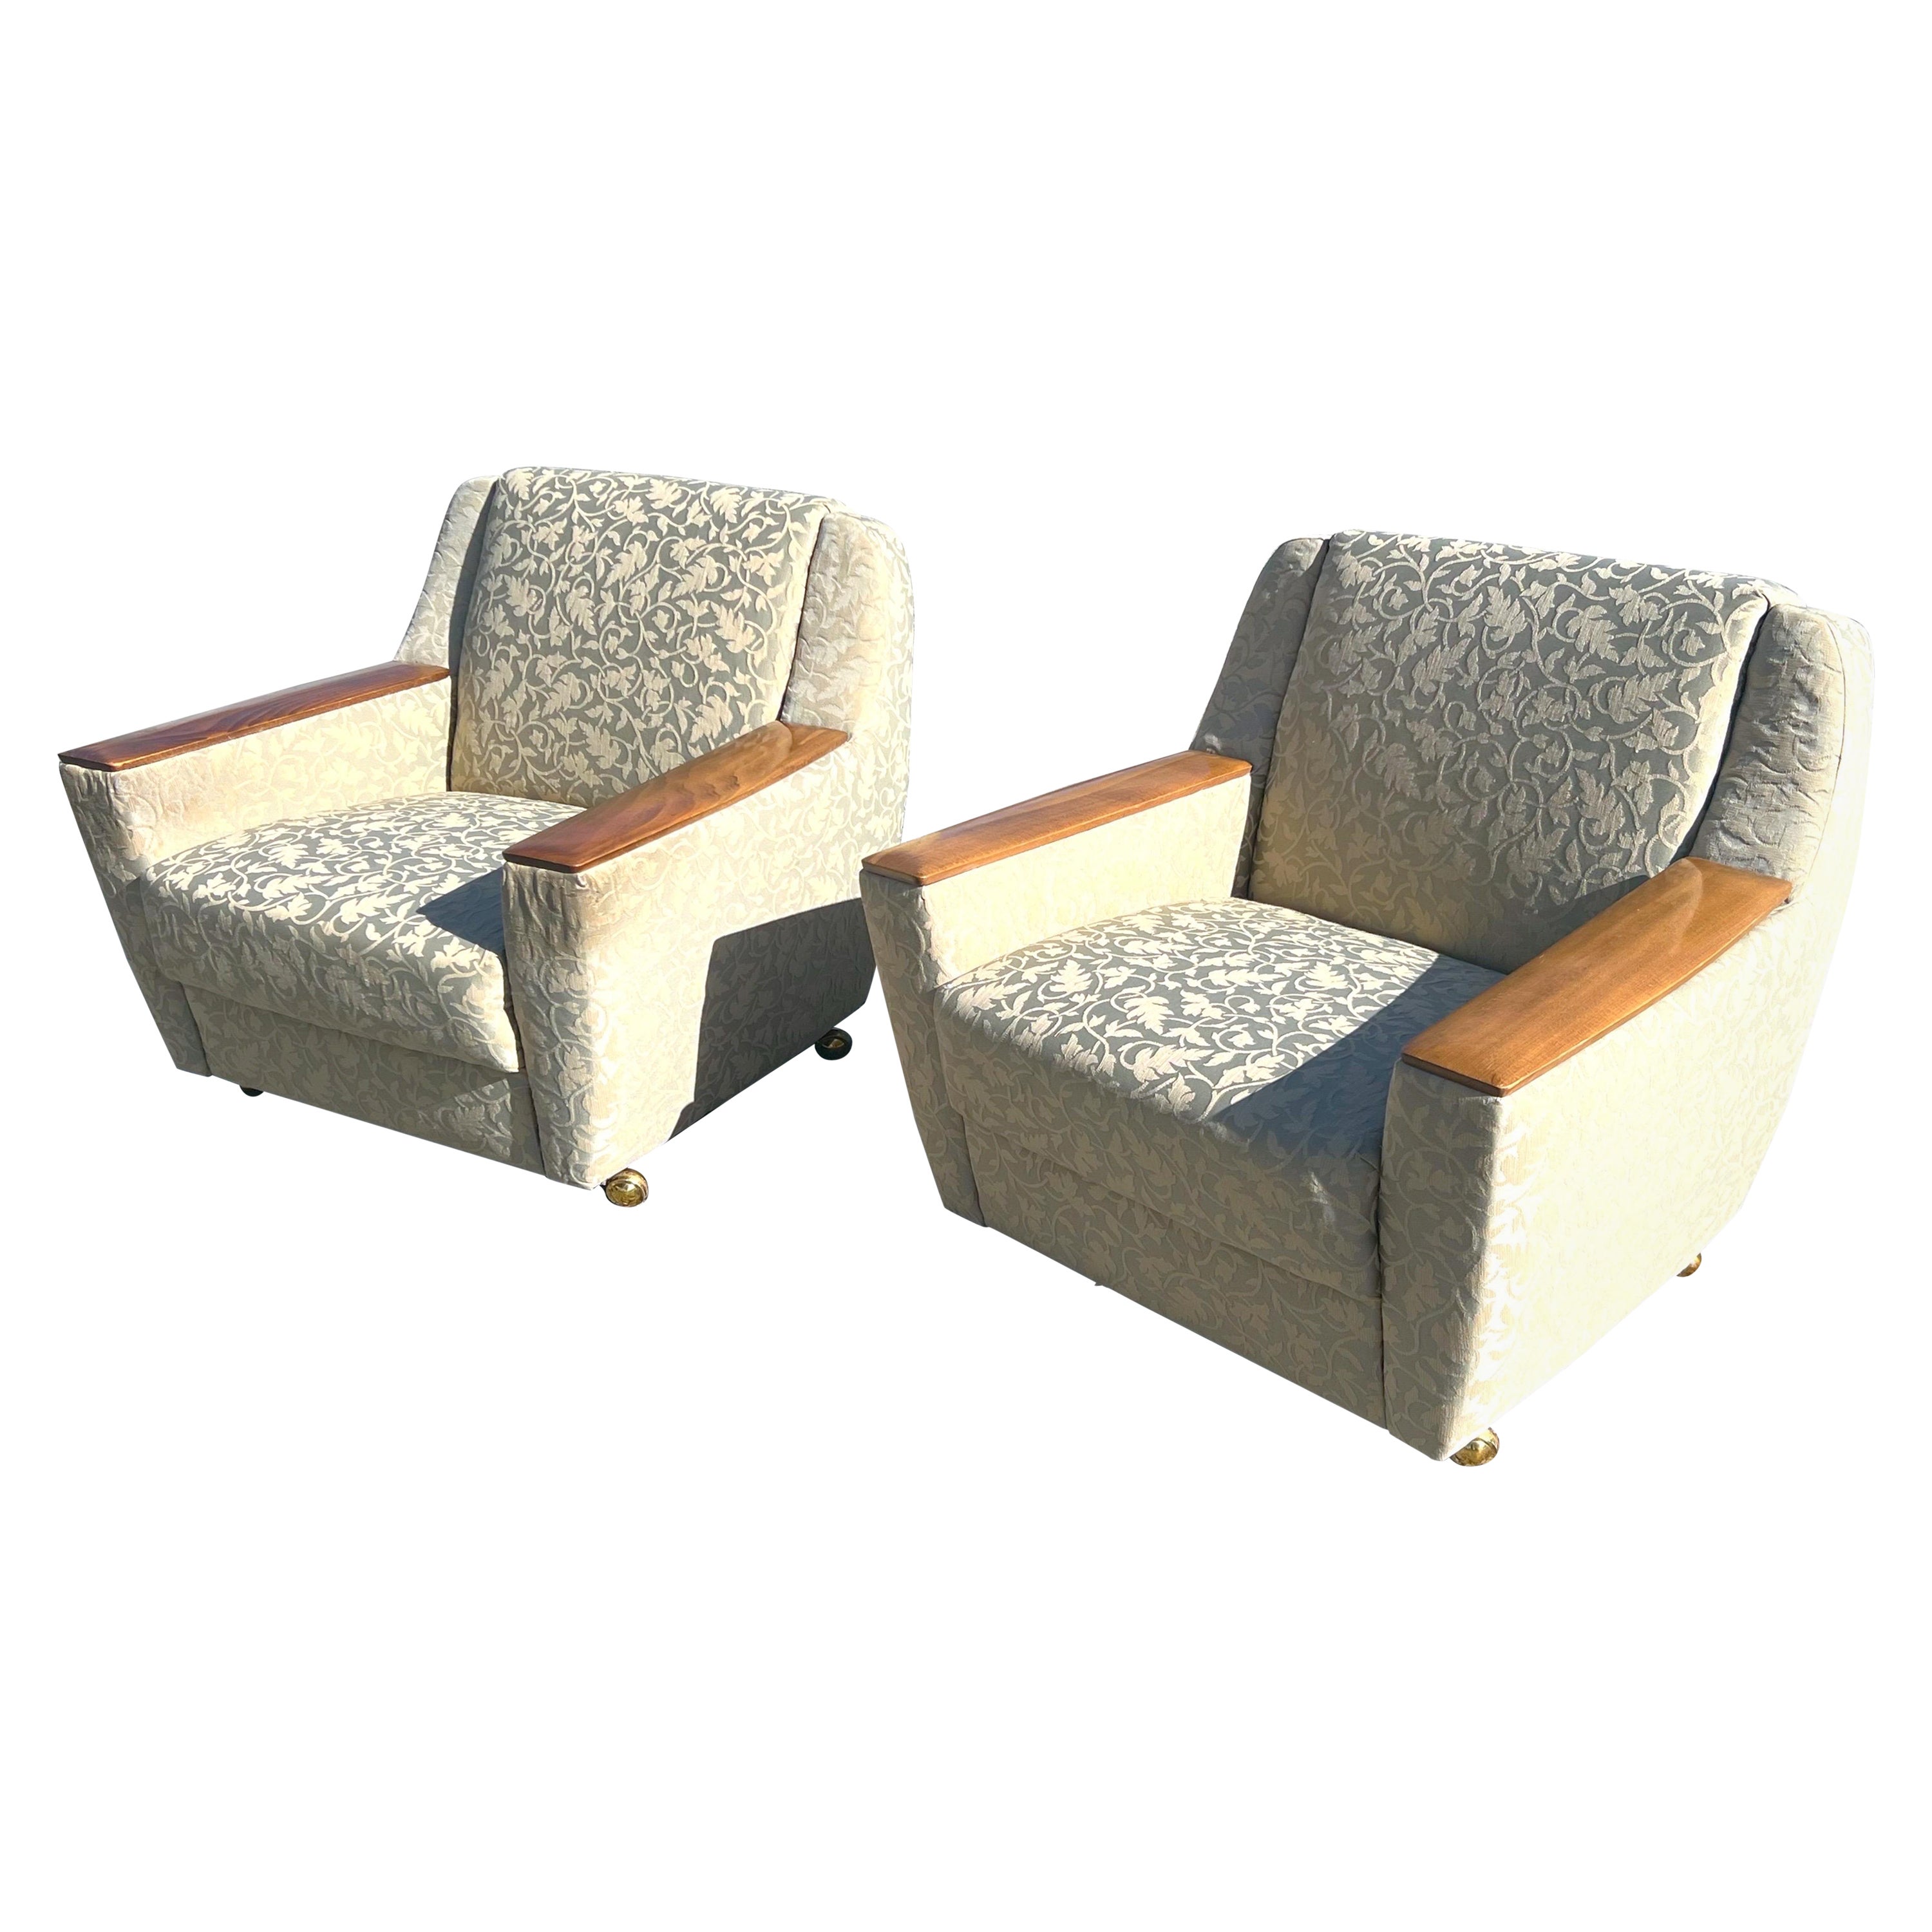 1950’s Swedish Modern Club Chairs With Wooden Arm Rests on Castors - a Pair For Sale